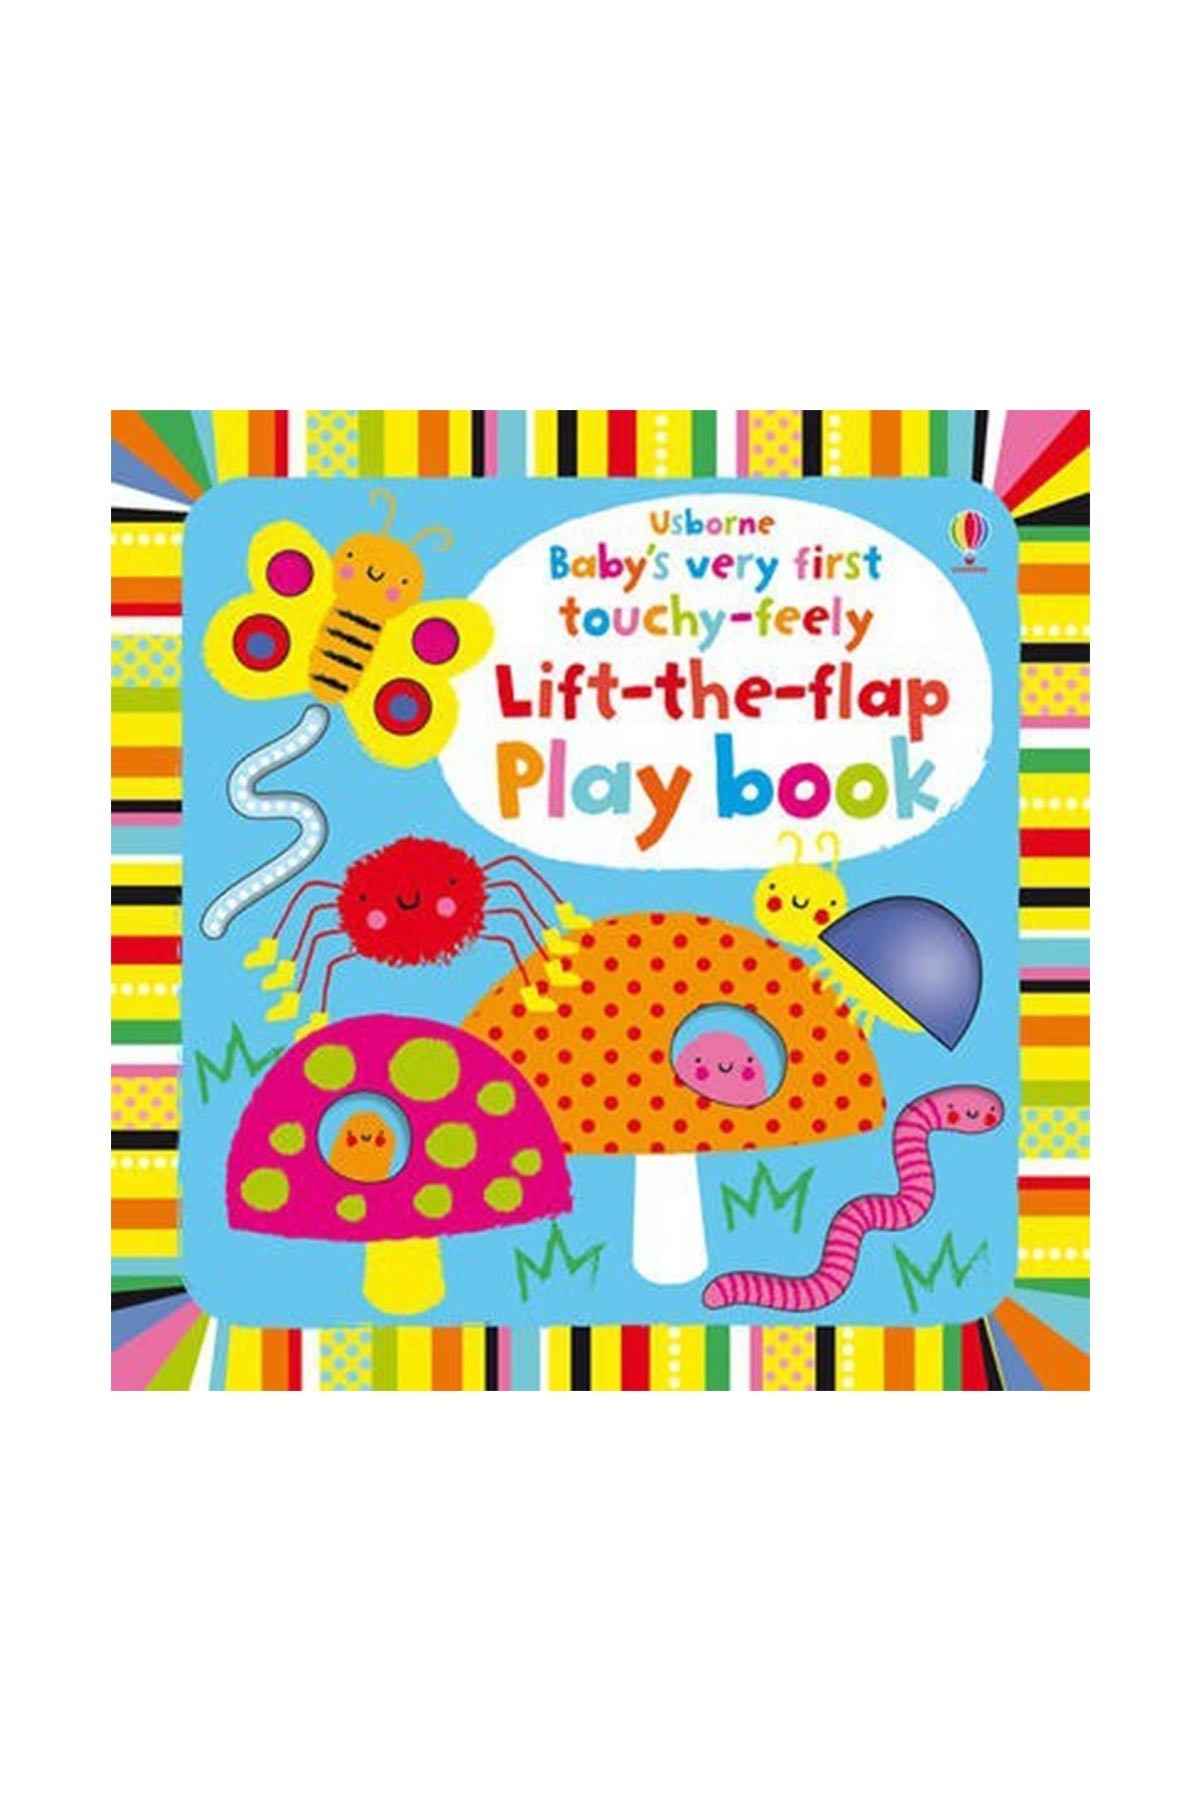 The Usborne BVF Lift the Flap Play Book